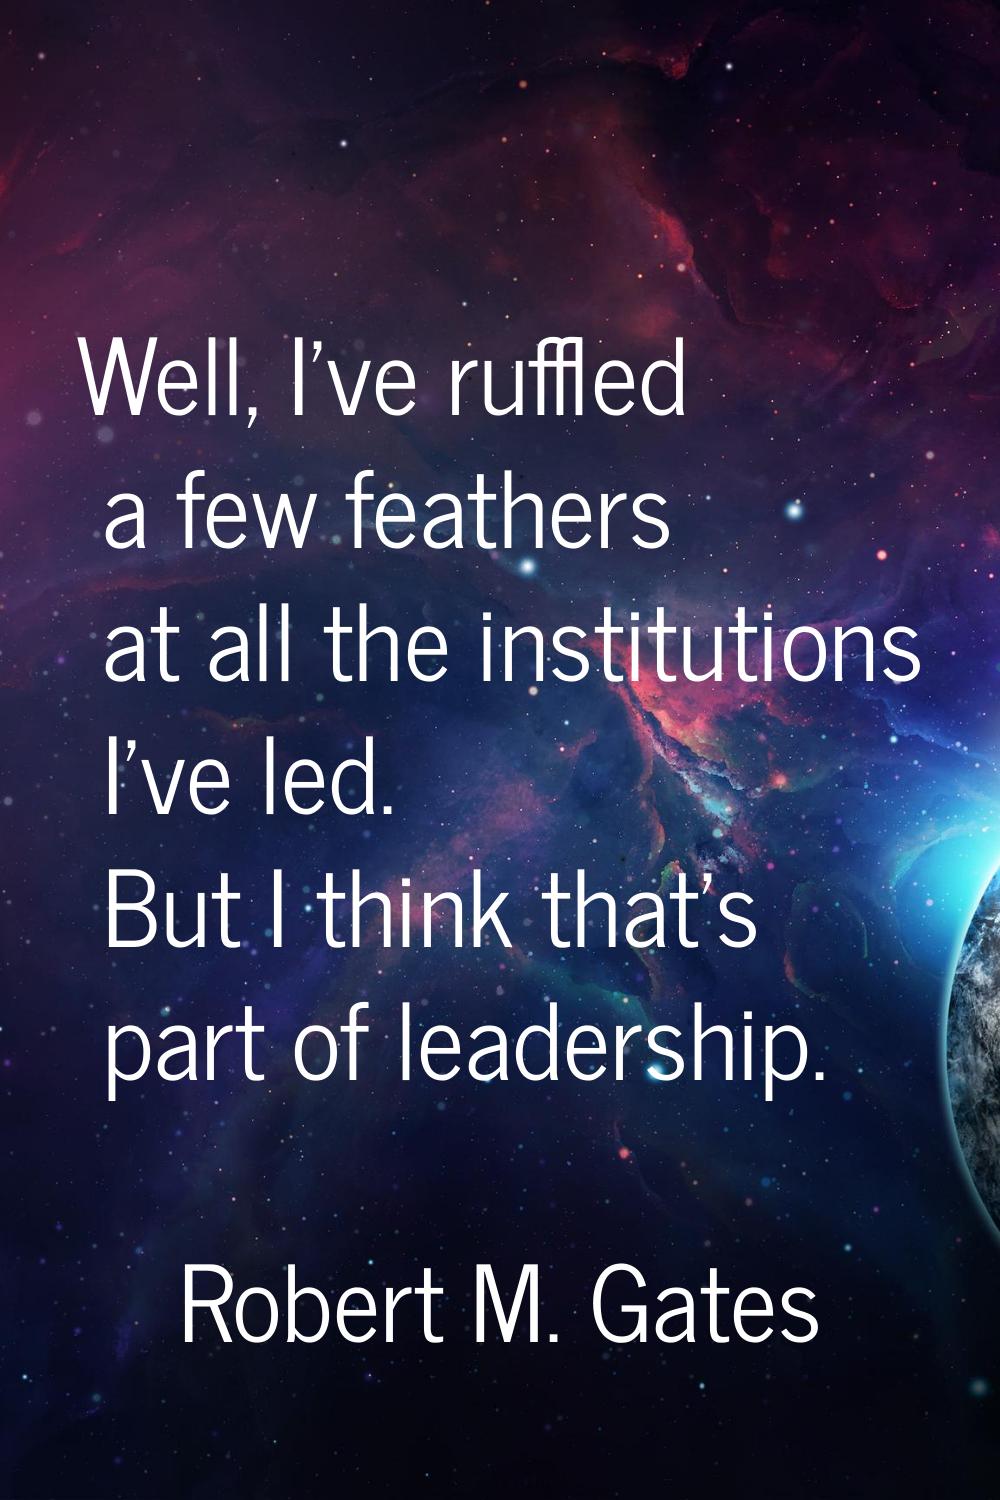 Well, I've ruffled a few feathers at all the institutions I've led. But I think that's part of lead